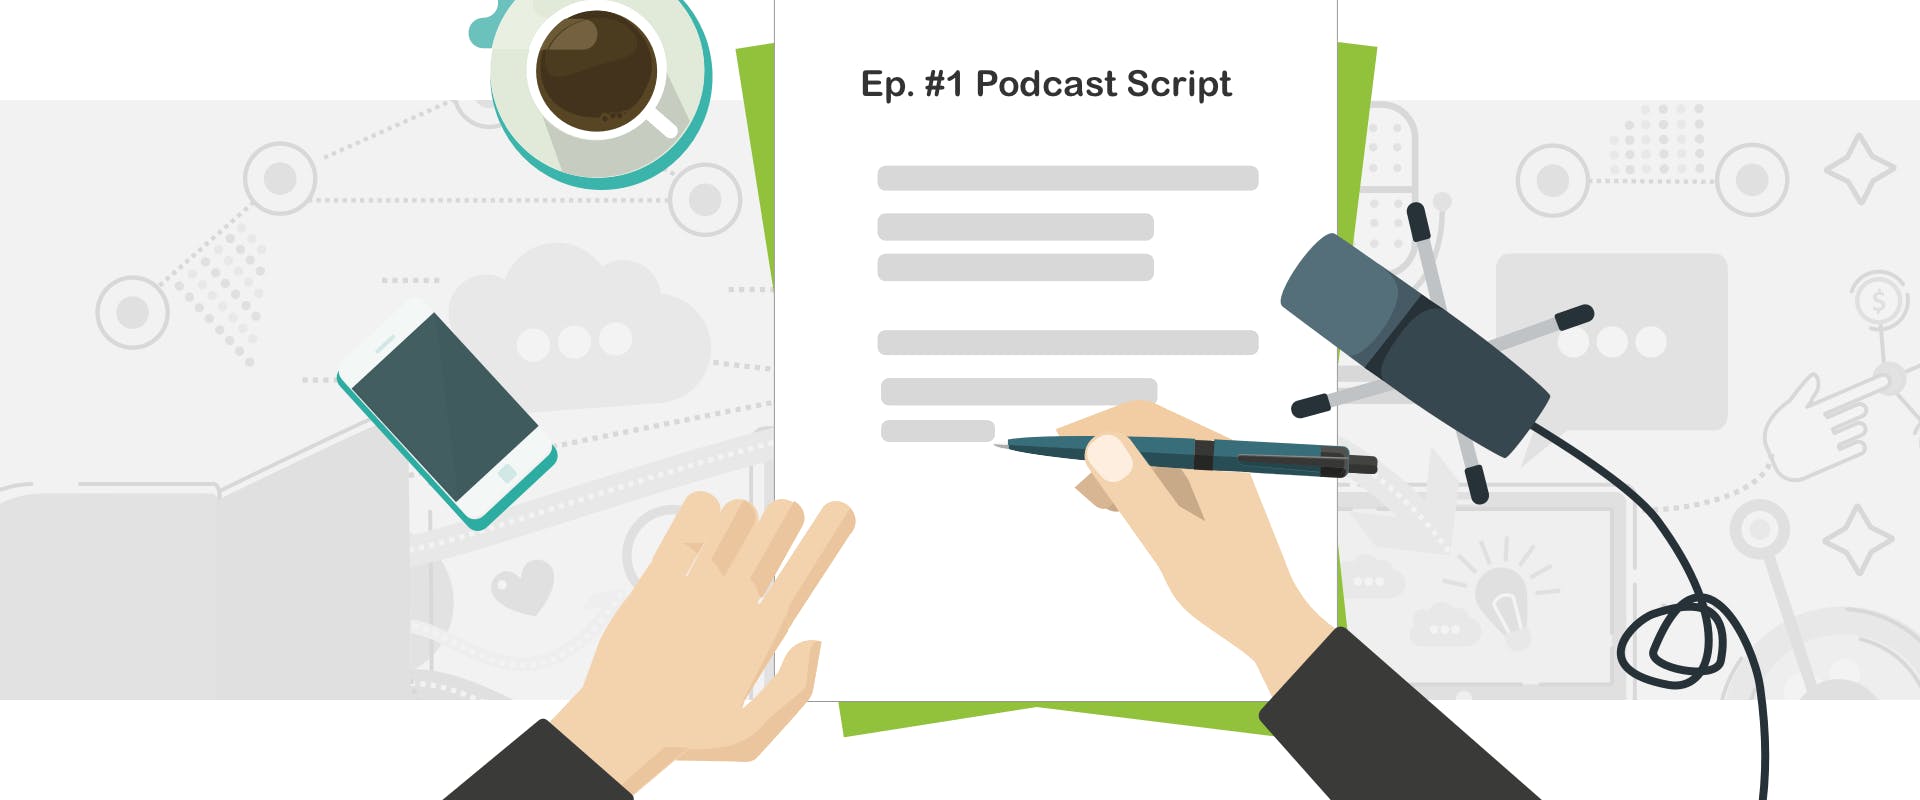 How to Write a Podcast Script [22 Free Script Templates]